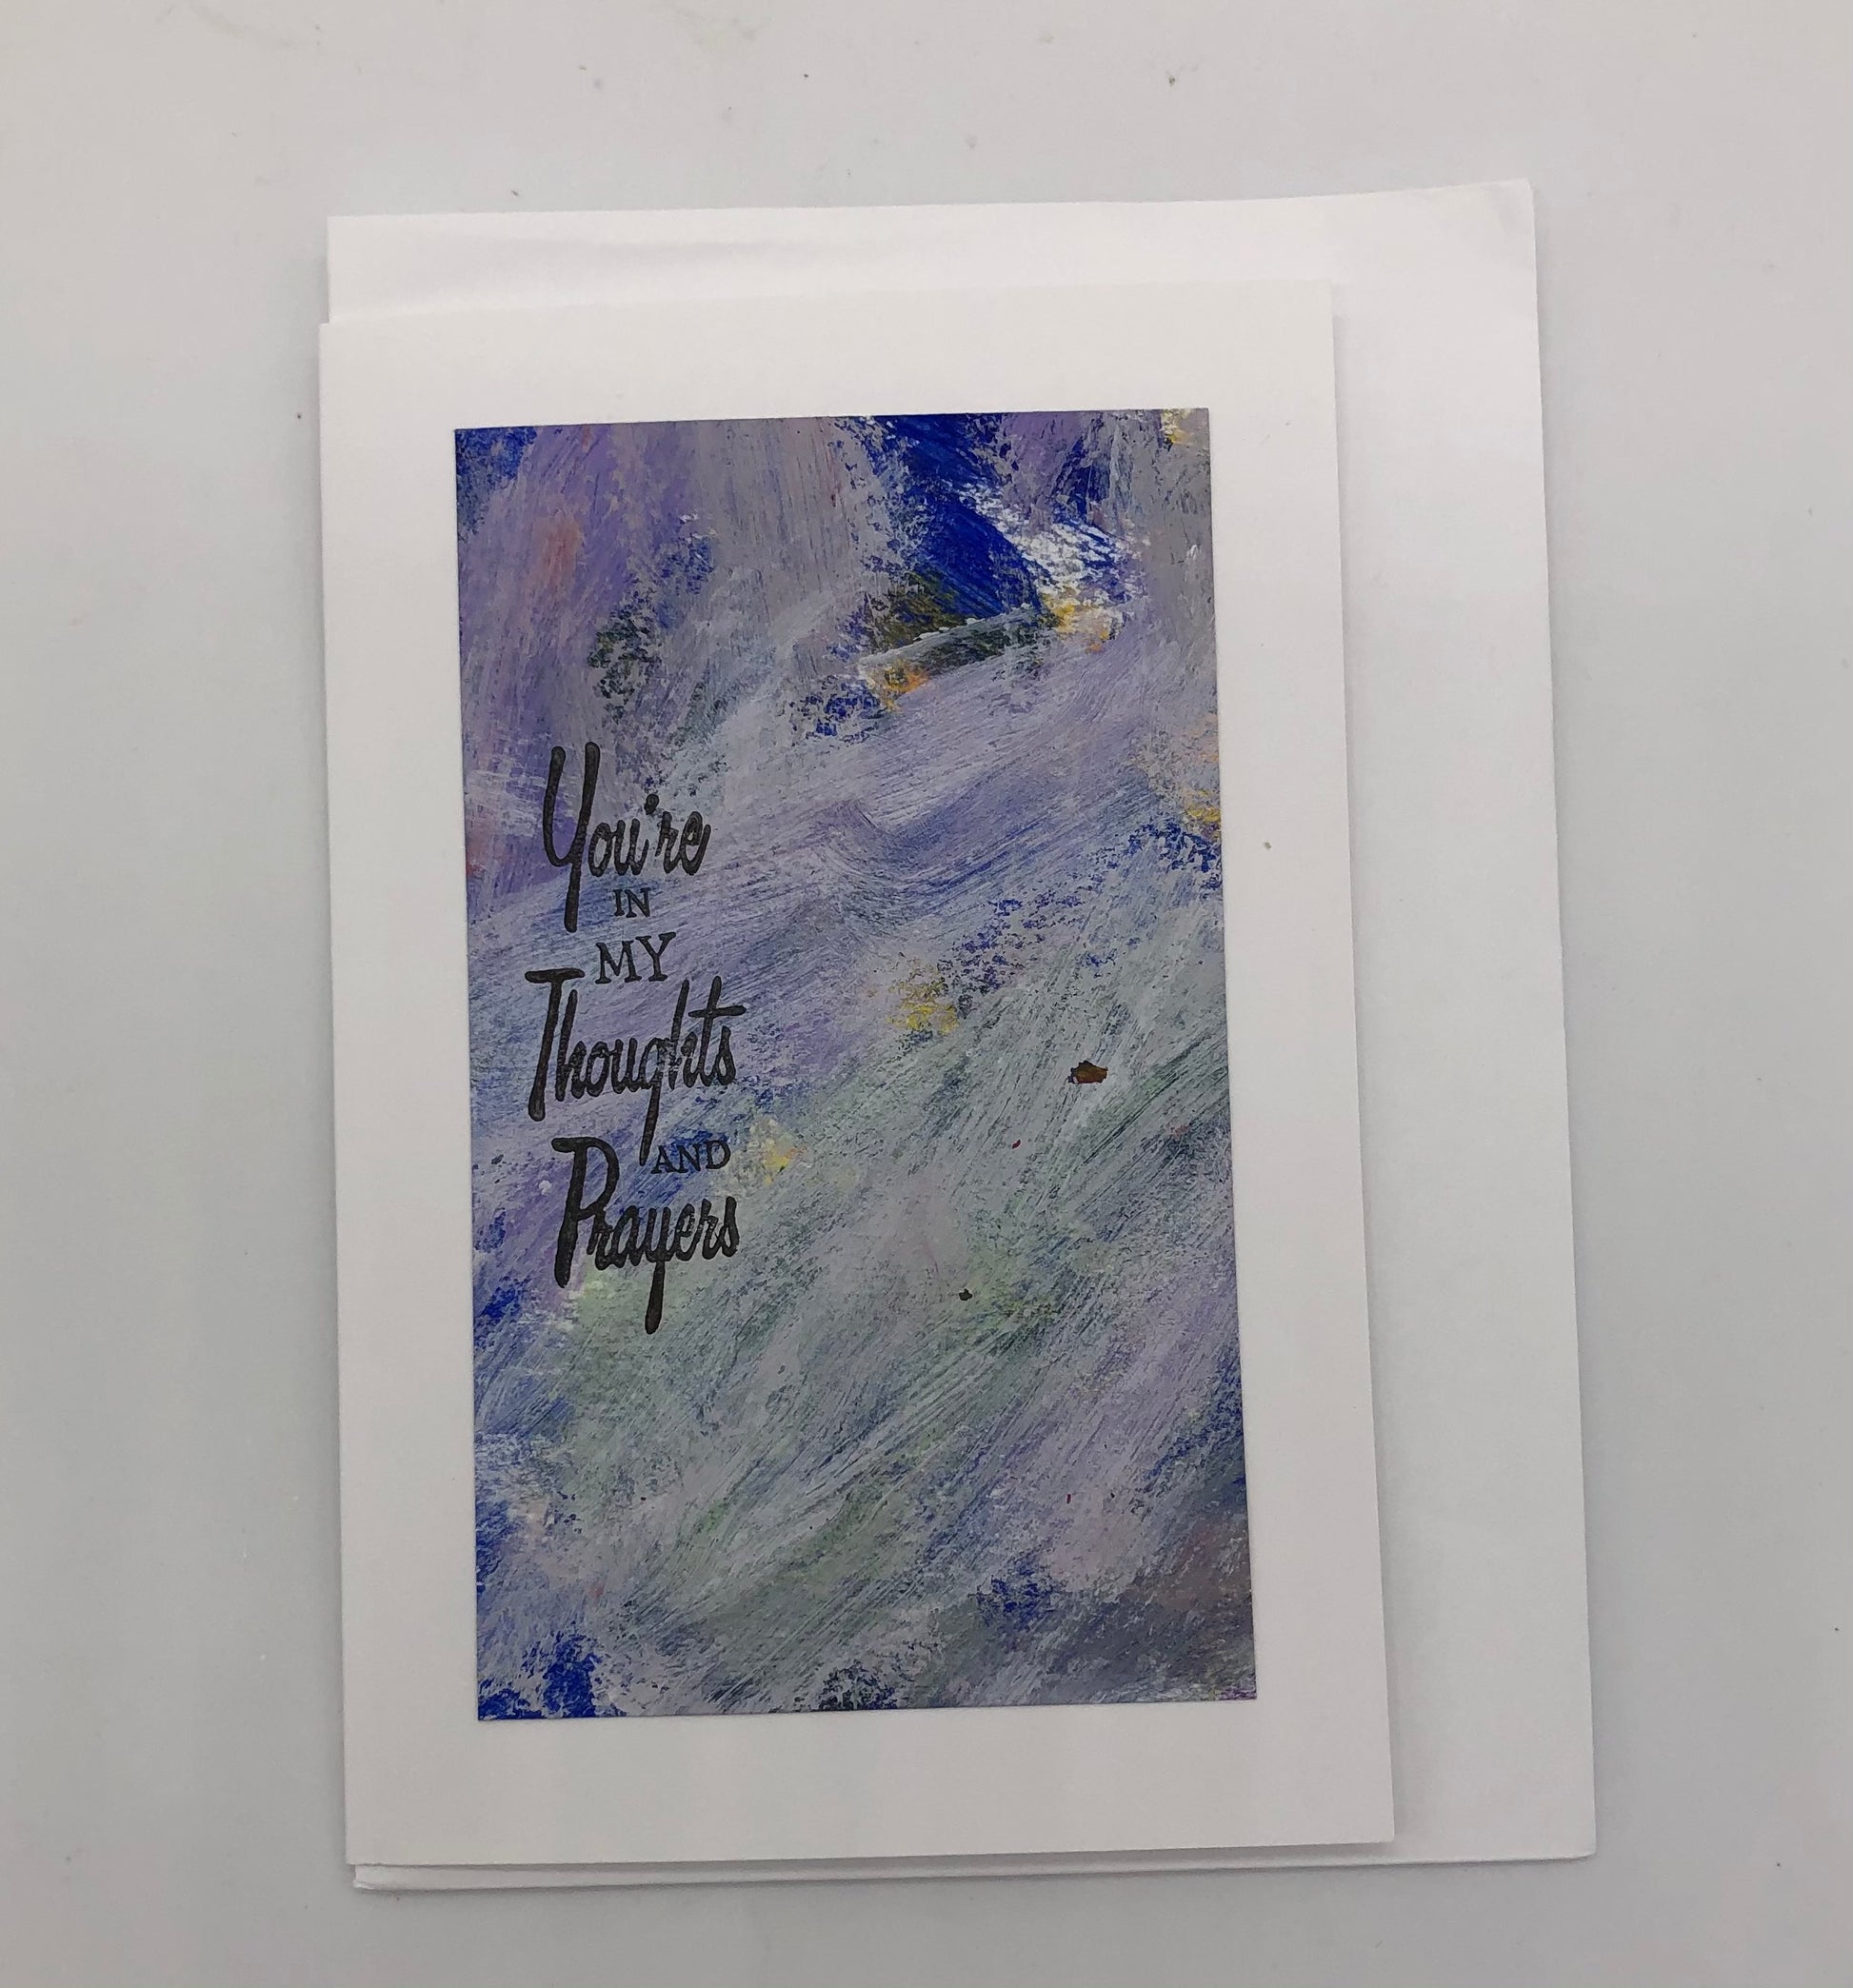 White greeting card with large acrylic painting in white and purple.  On top of the painting is stamped "You're in my thoughts and prayers" in black on the left hand side.